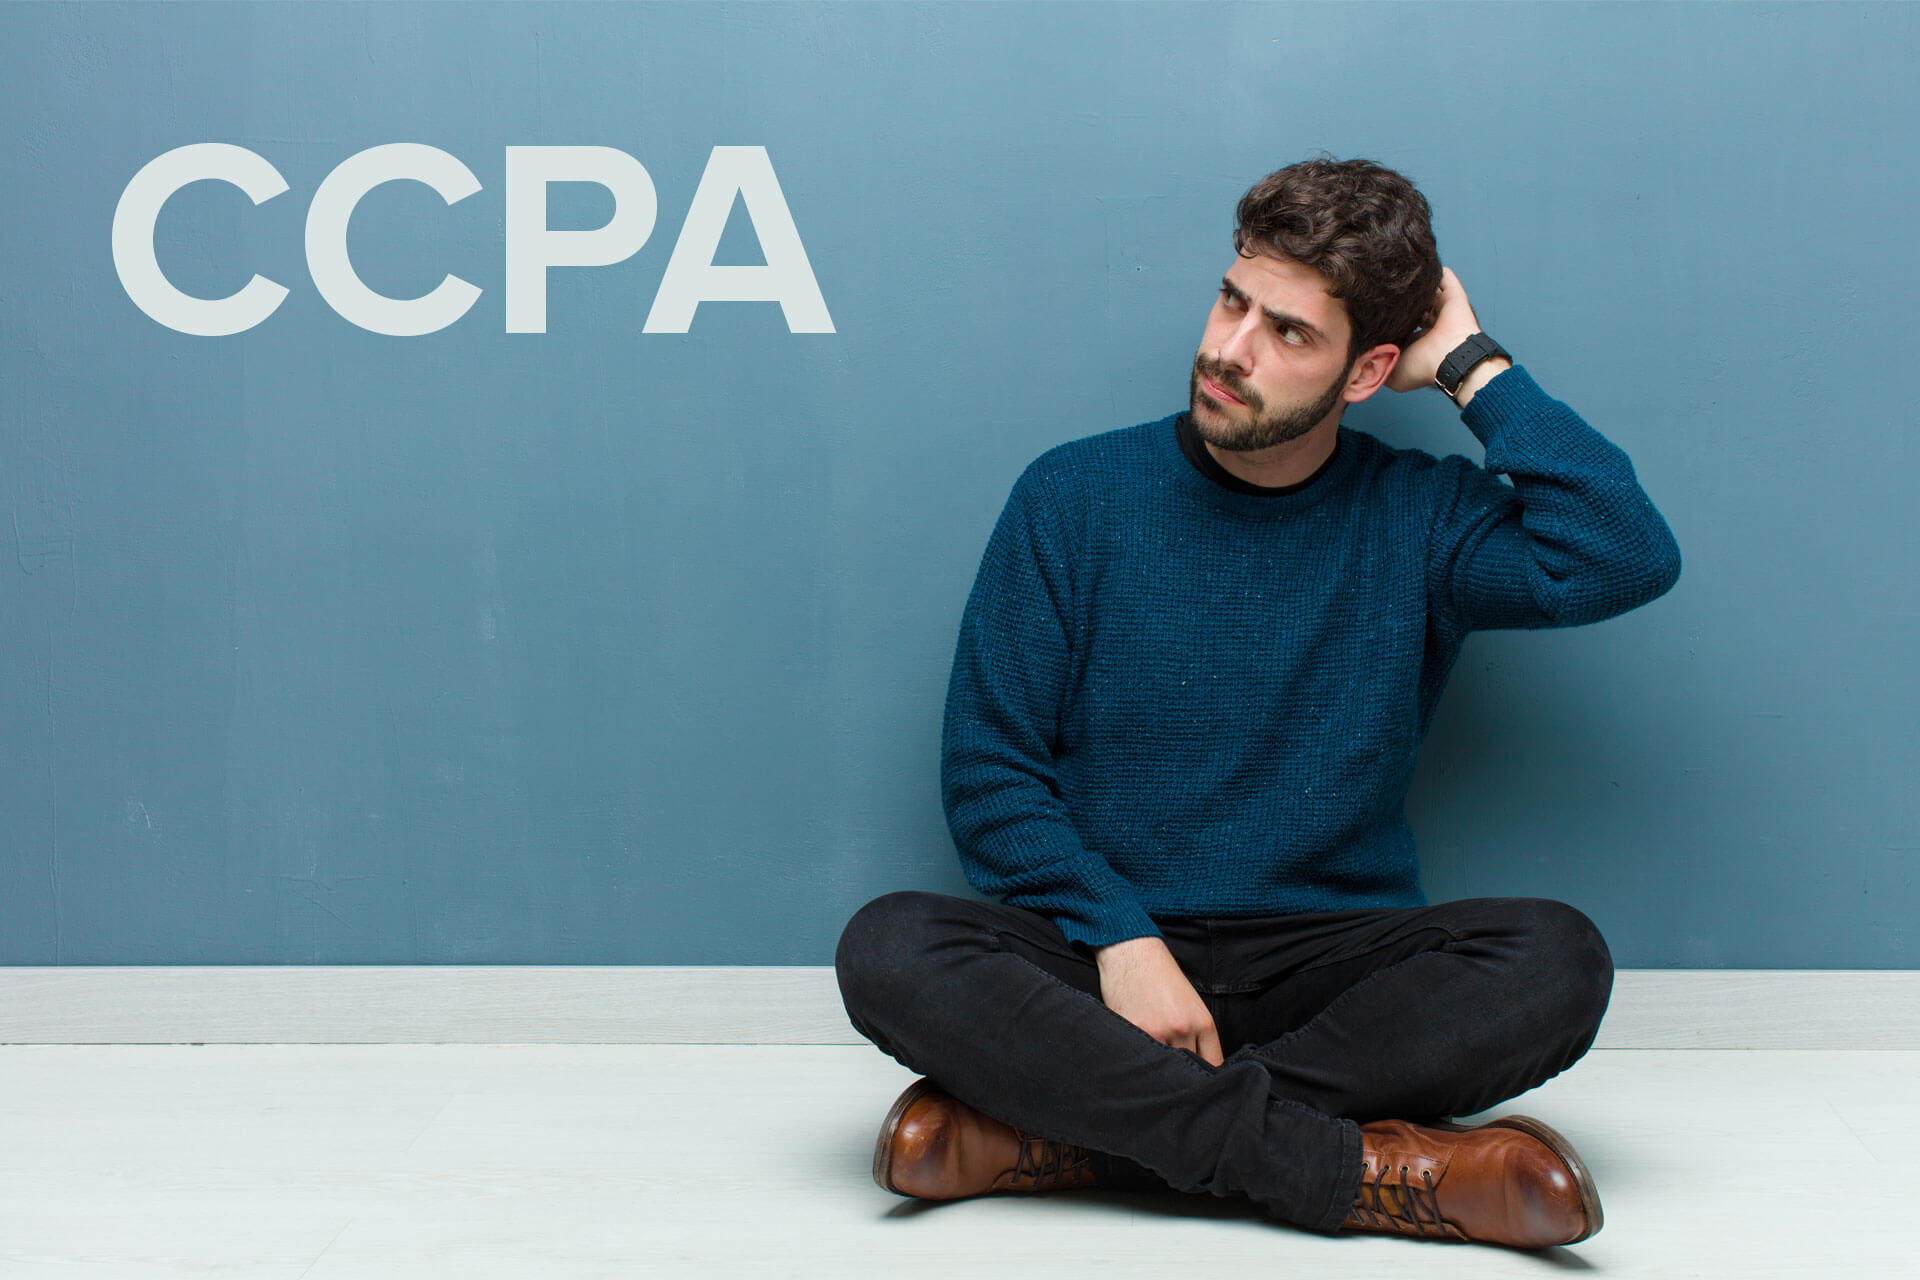 confused man scratching head next to CCPA text